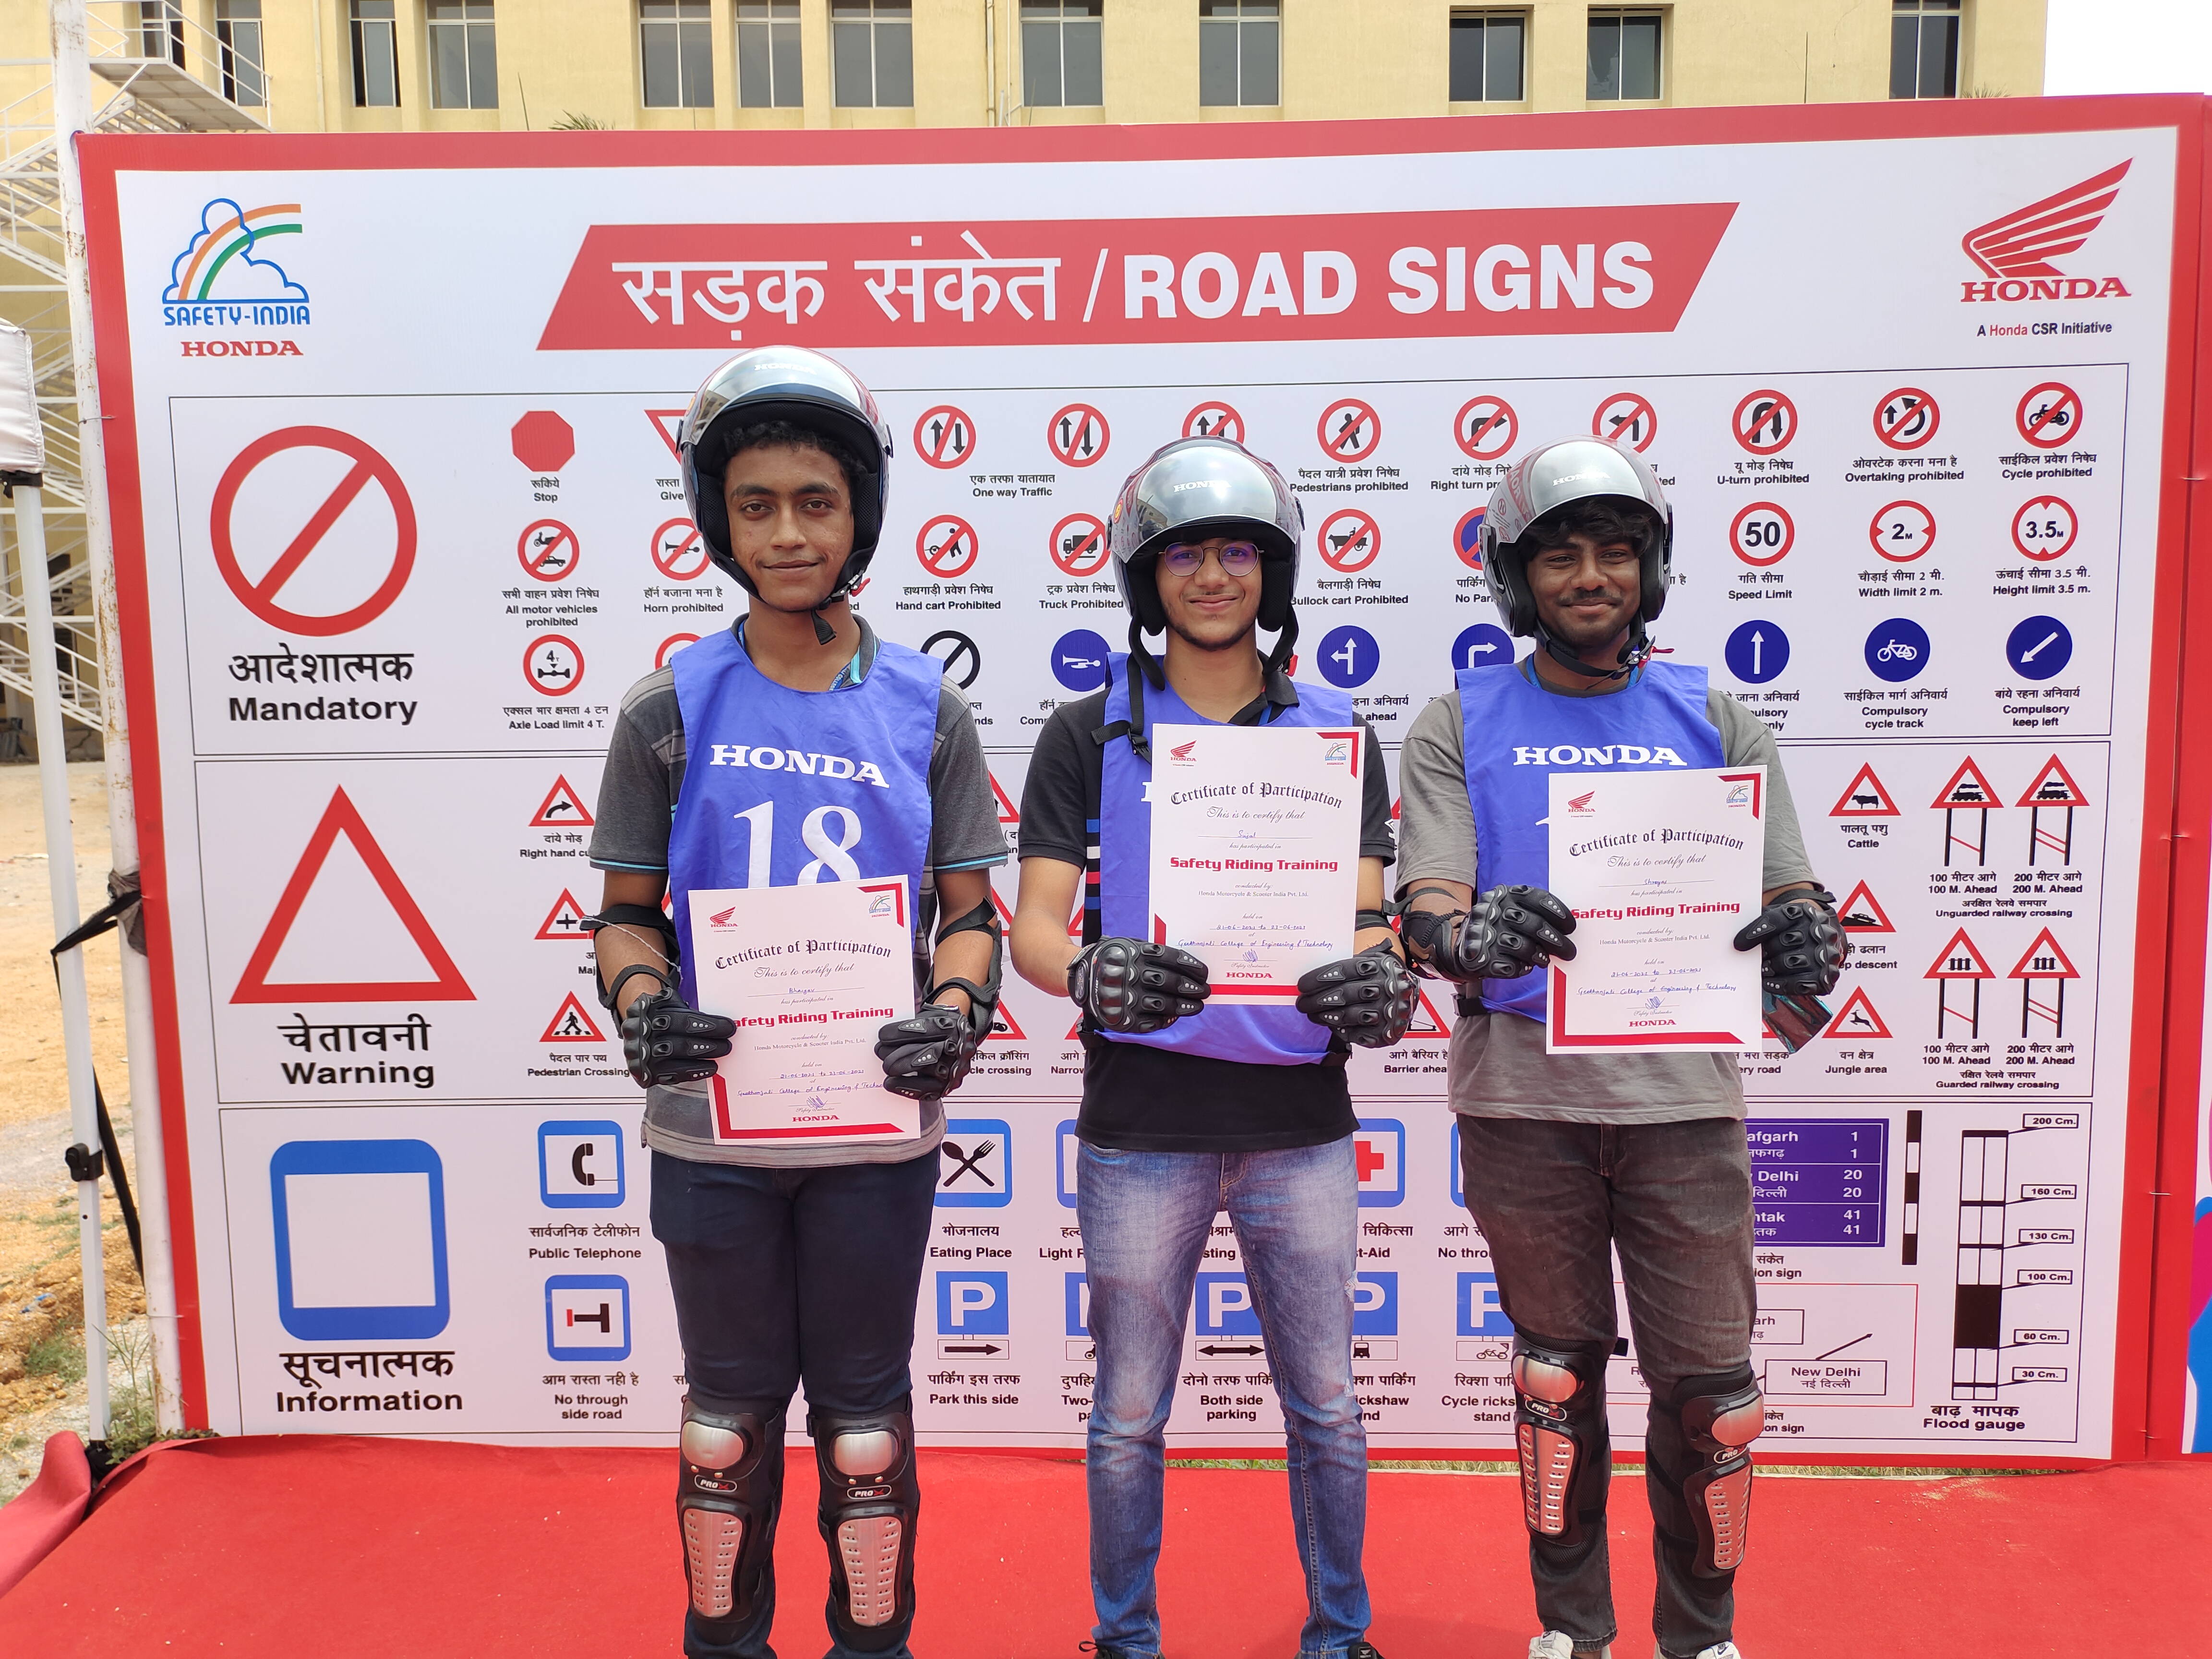 Honda Motorcycle & Scooter India conducts  Road Safety Awareness Campaign in Hyderabad, Telangana